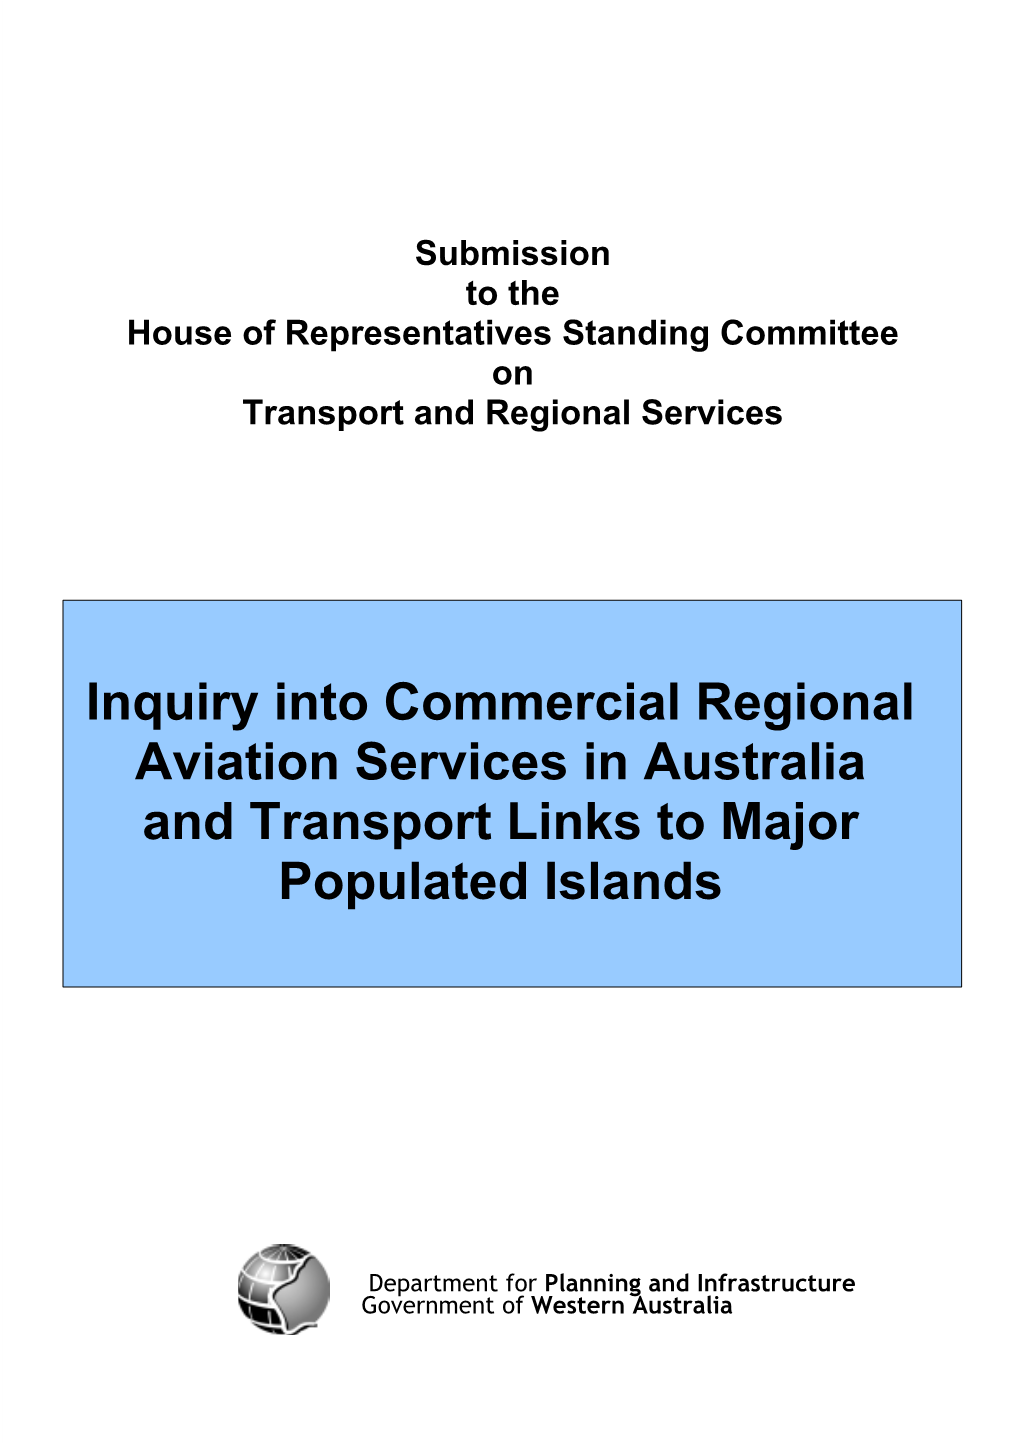 Inquiry Into Commercial Regional Aviation Services in Australia and Transport Links to Major Populated Islands